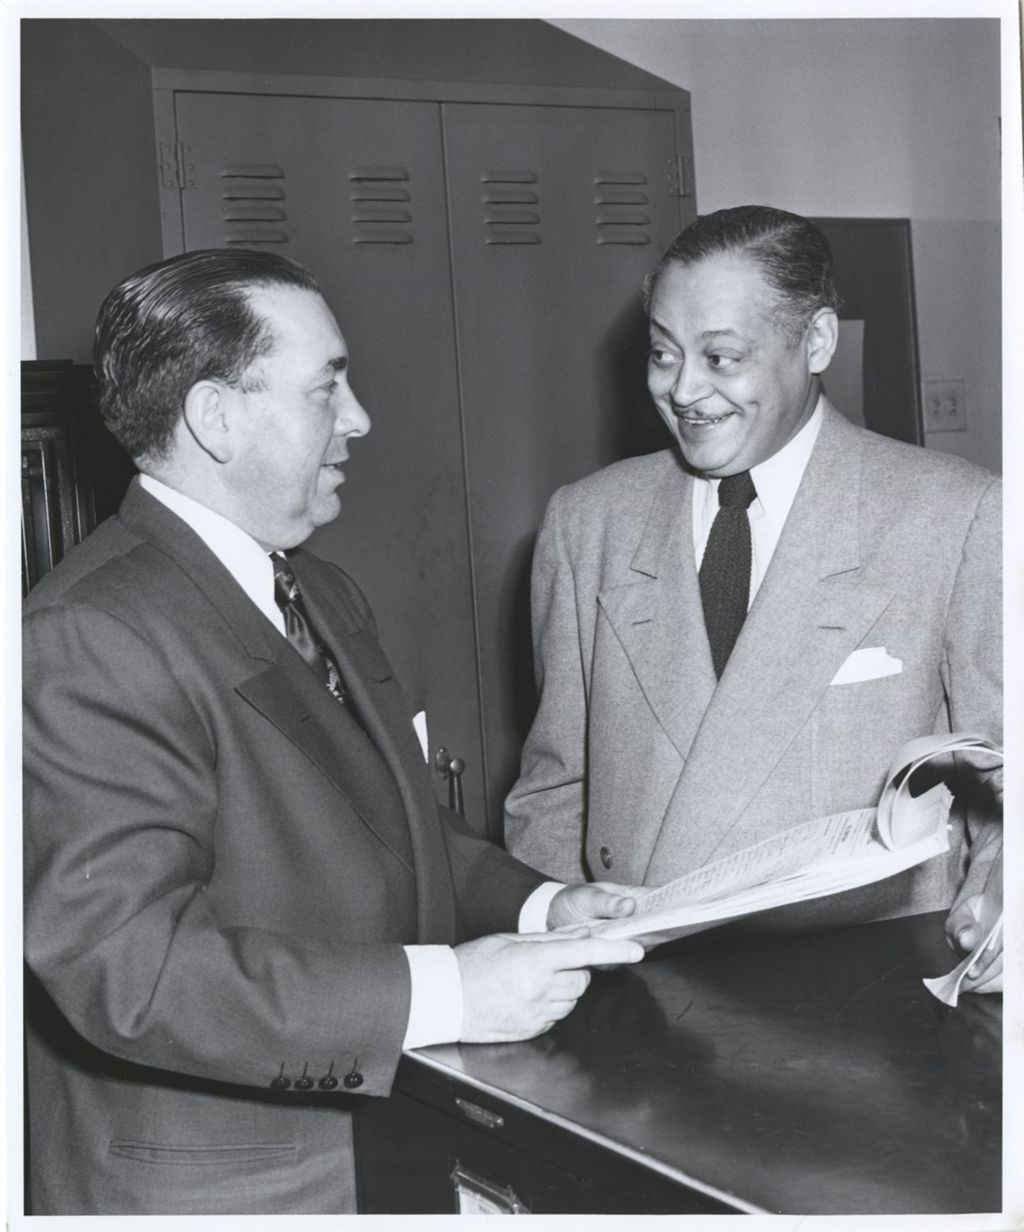 Miniature of Richard J. Daley and a man with a petition